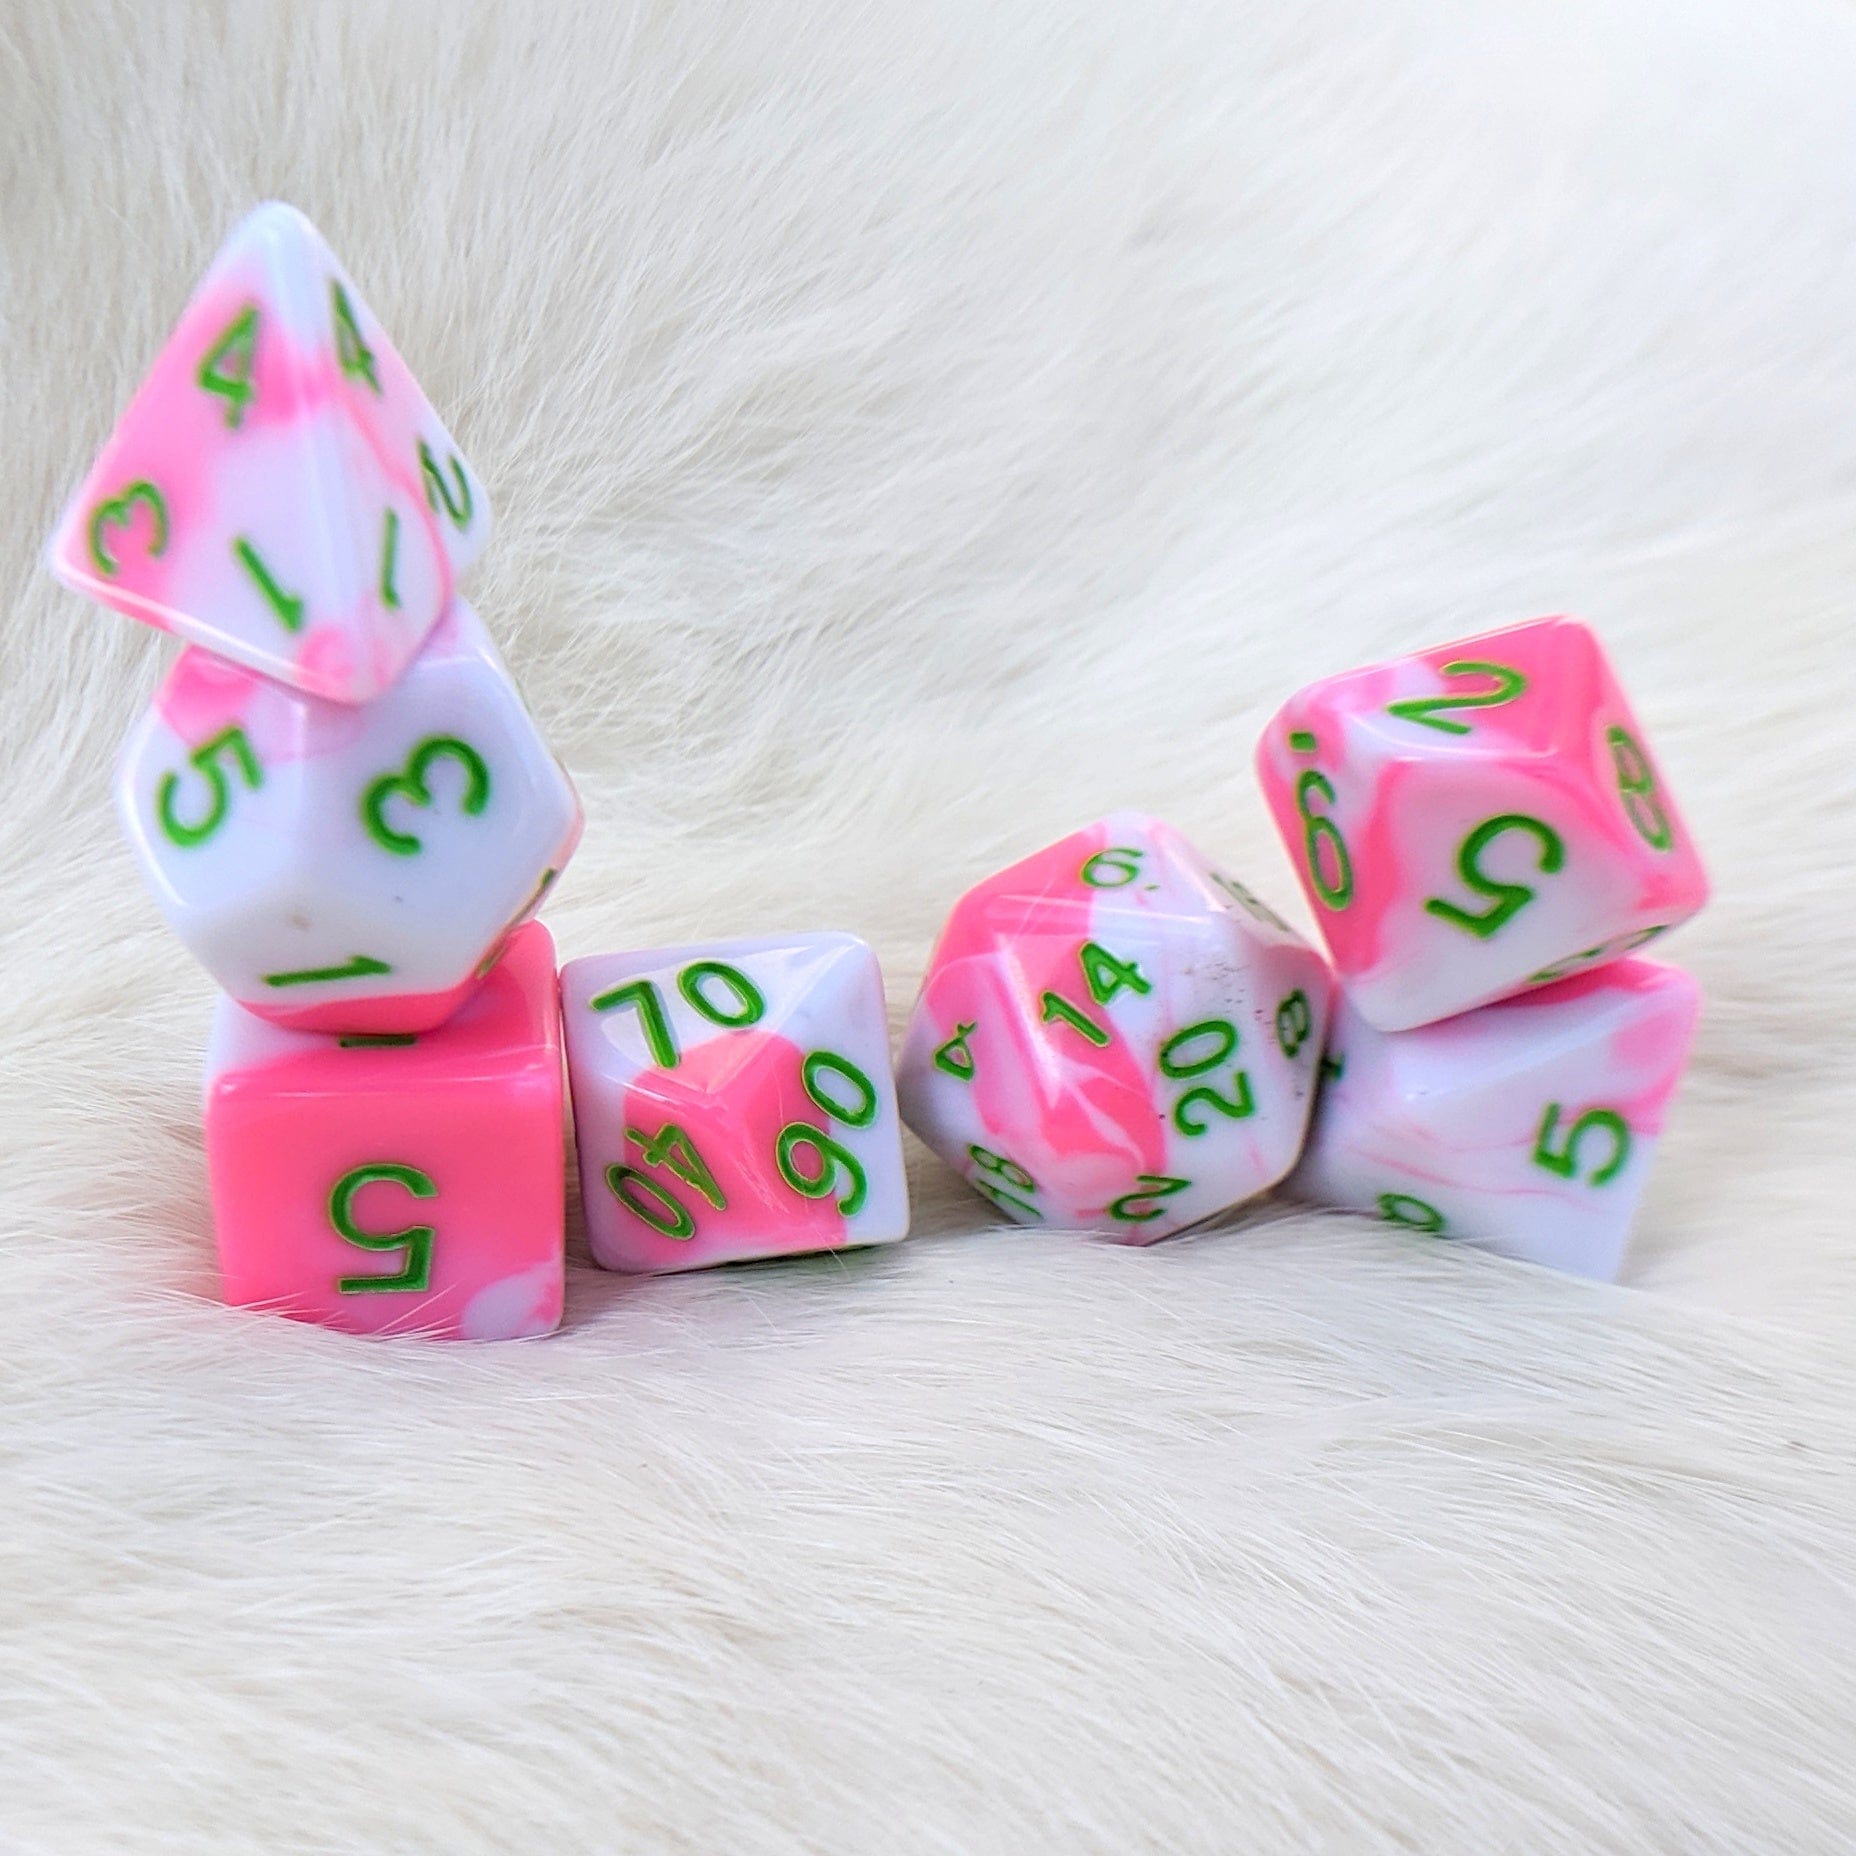 Kawaii Death Bringer DnD Dice Set, Pink and white Marble Dice - CozyGamer